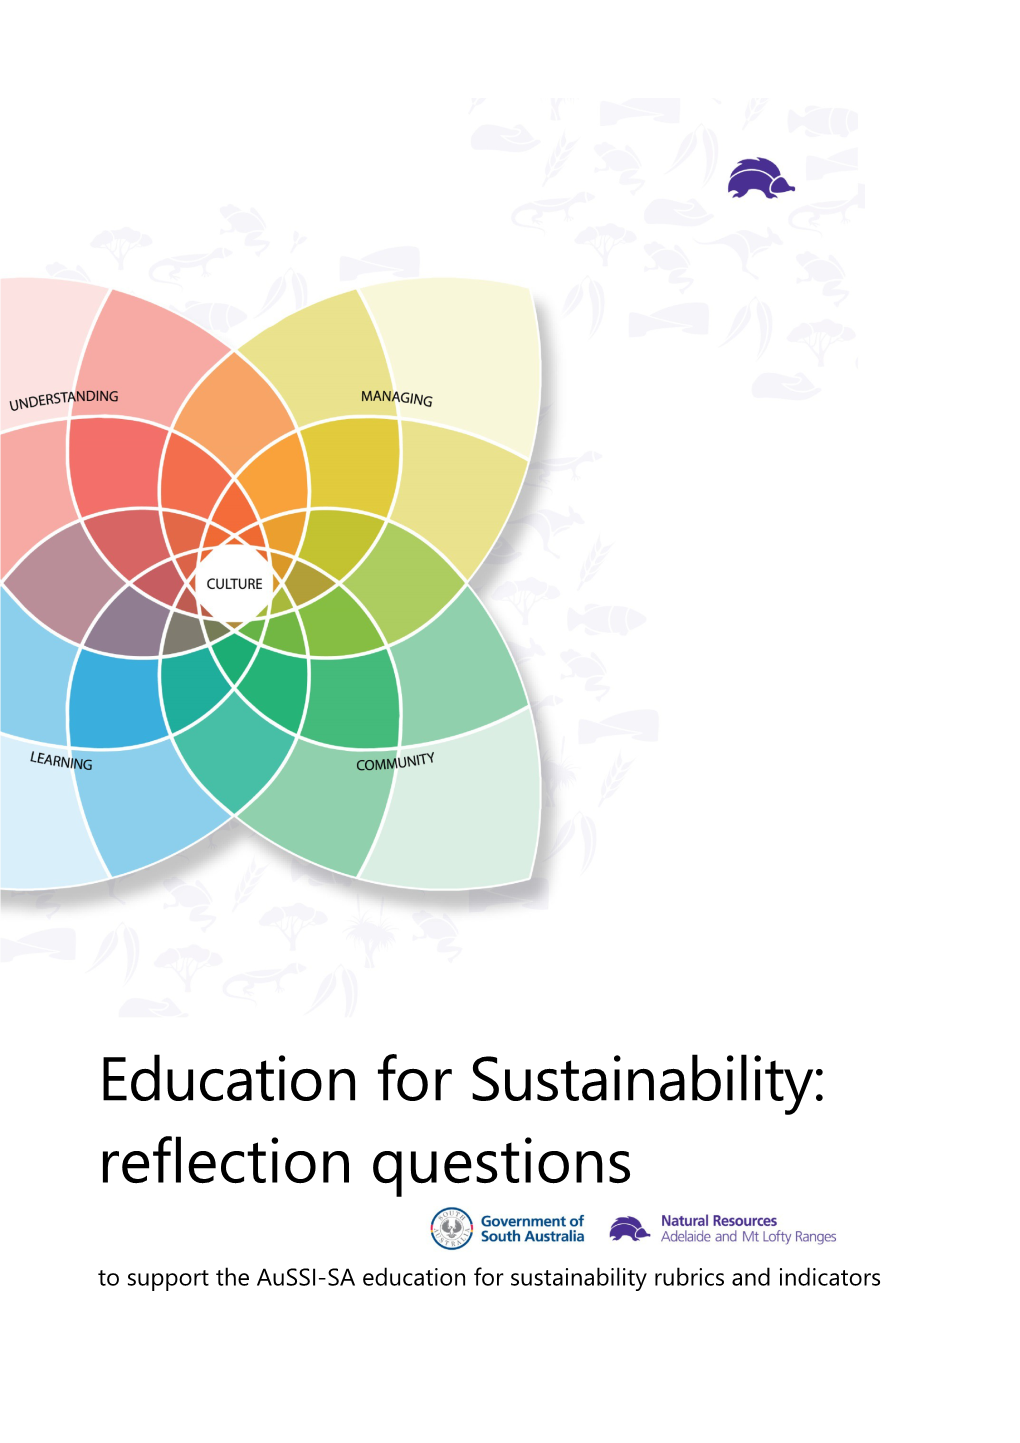 To Support the Aussi-SA Education for Sustainability Rubrics and Indicators